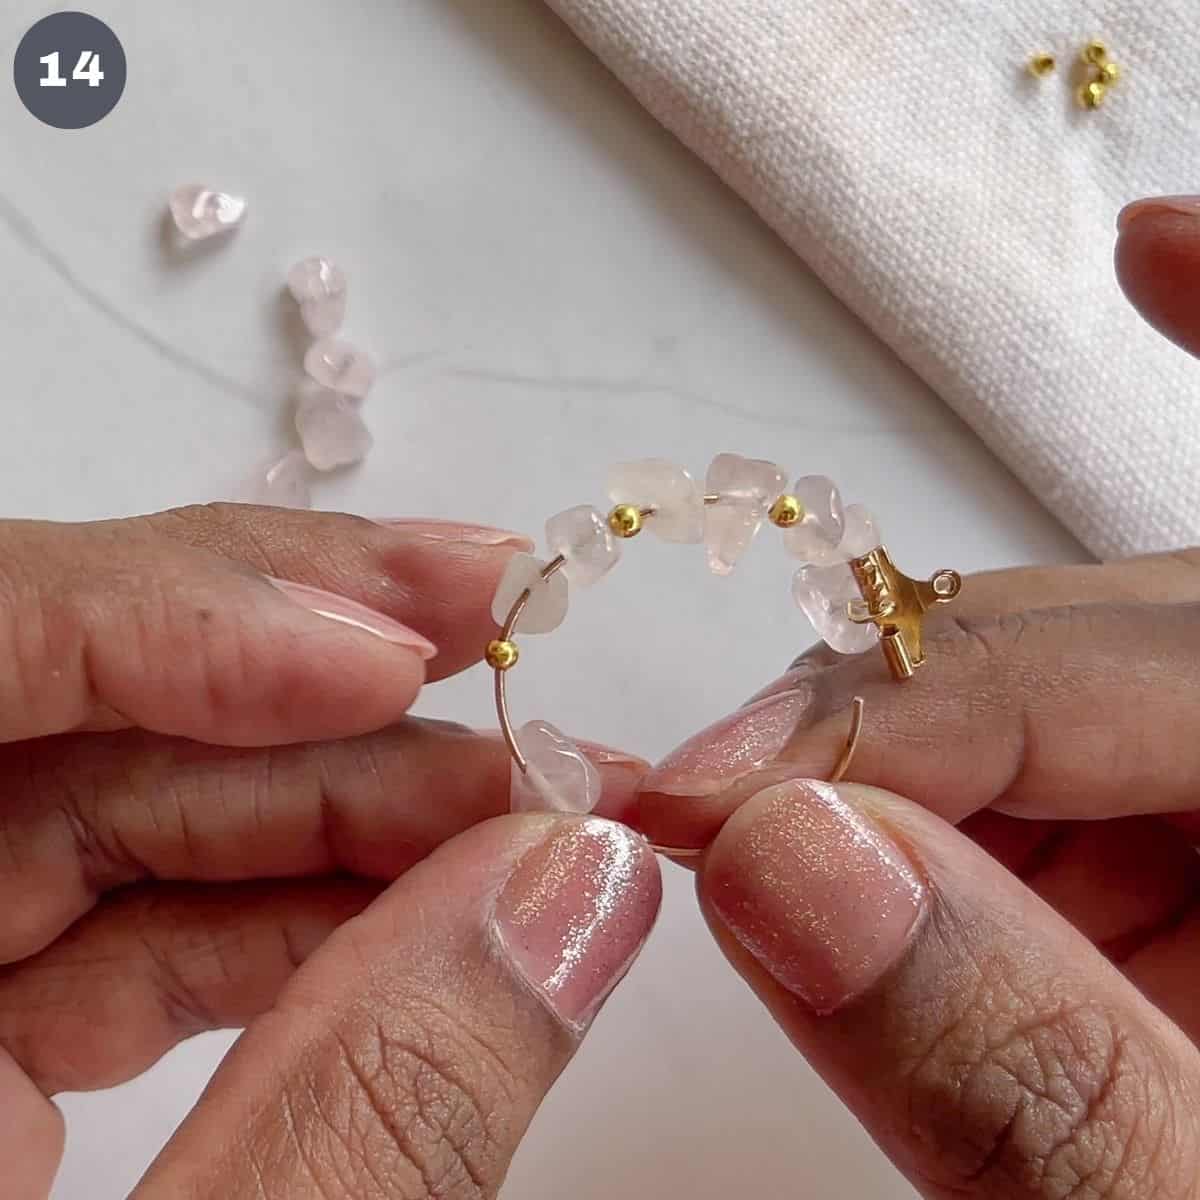 Inserting pink rose quartz beads into a hoop.